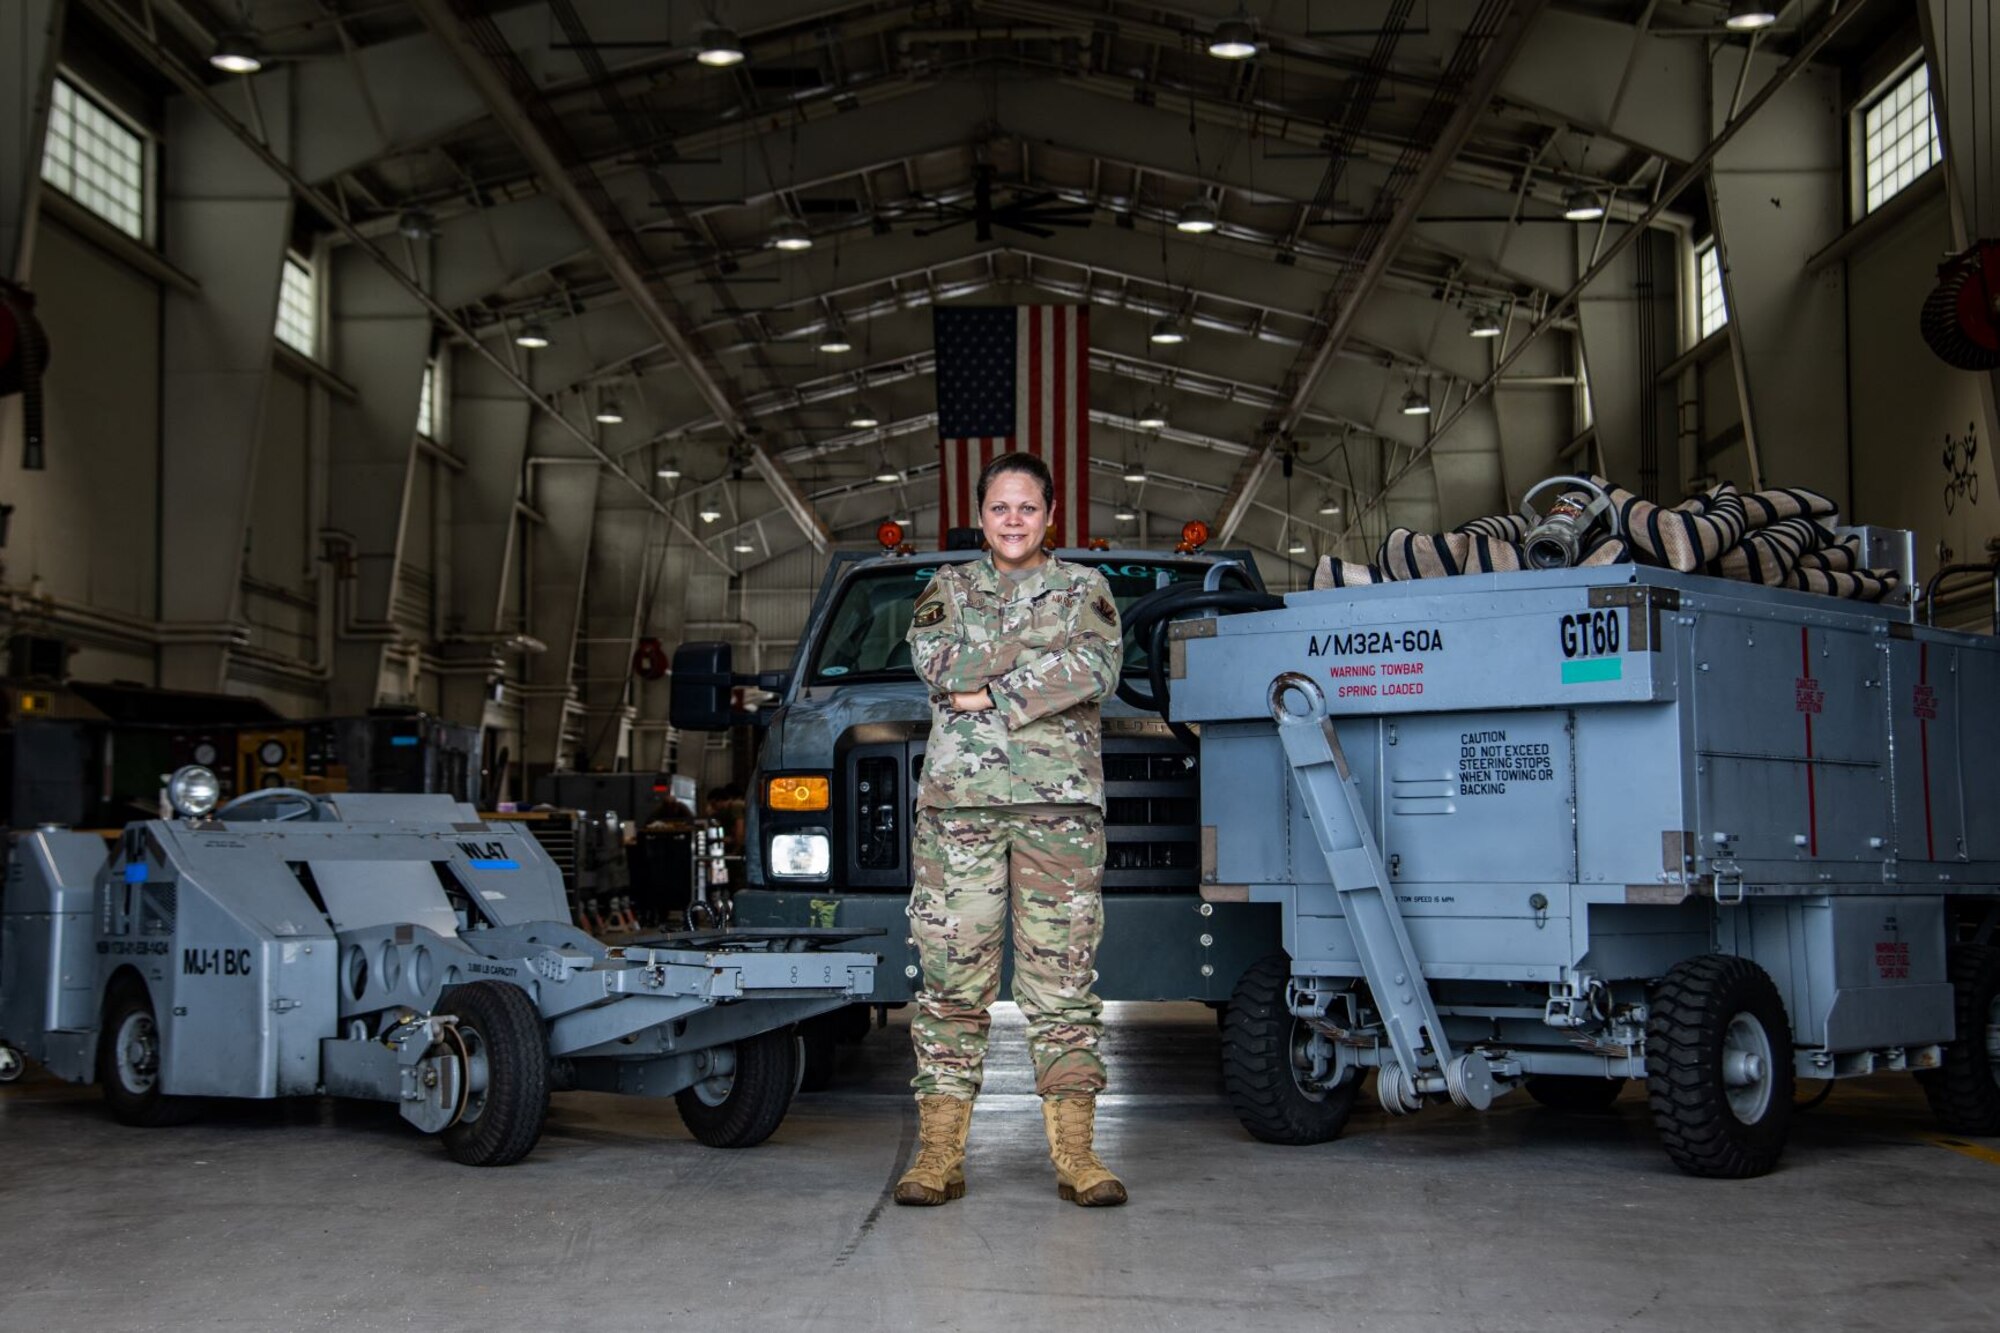 Tech. Sgt. Natalia Wood, 20th Equipment Maintenance Squadron aerospace ground equipment maintenance Airman, poses in her workplace while showcasing the 20th Fighter Wing assets she maintains at Shaw Air Force Base, S.C., Aug. 25, 2020. In her role on the women’s initiative team, she helped champion the effort to ensure practical lactation spaces and breastmilk storage for women in the Department of the Air Force. (U.S. Air Force photo by Staff Sgt. Sean Sweeney)